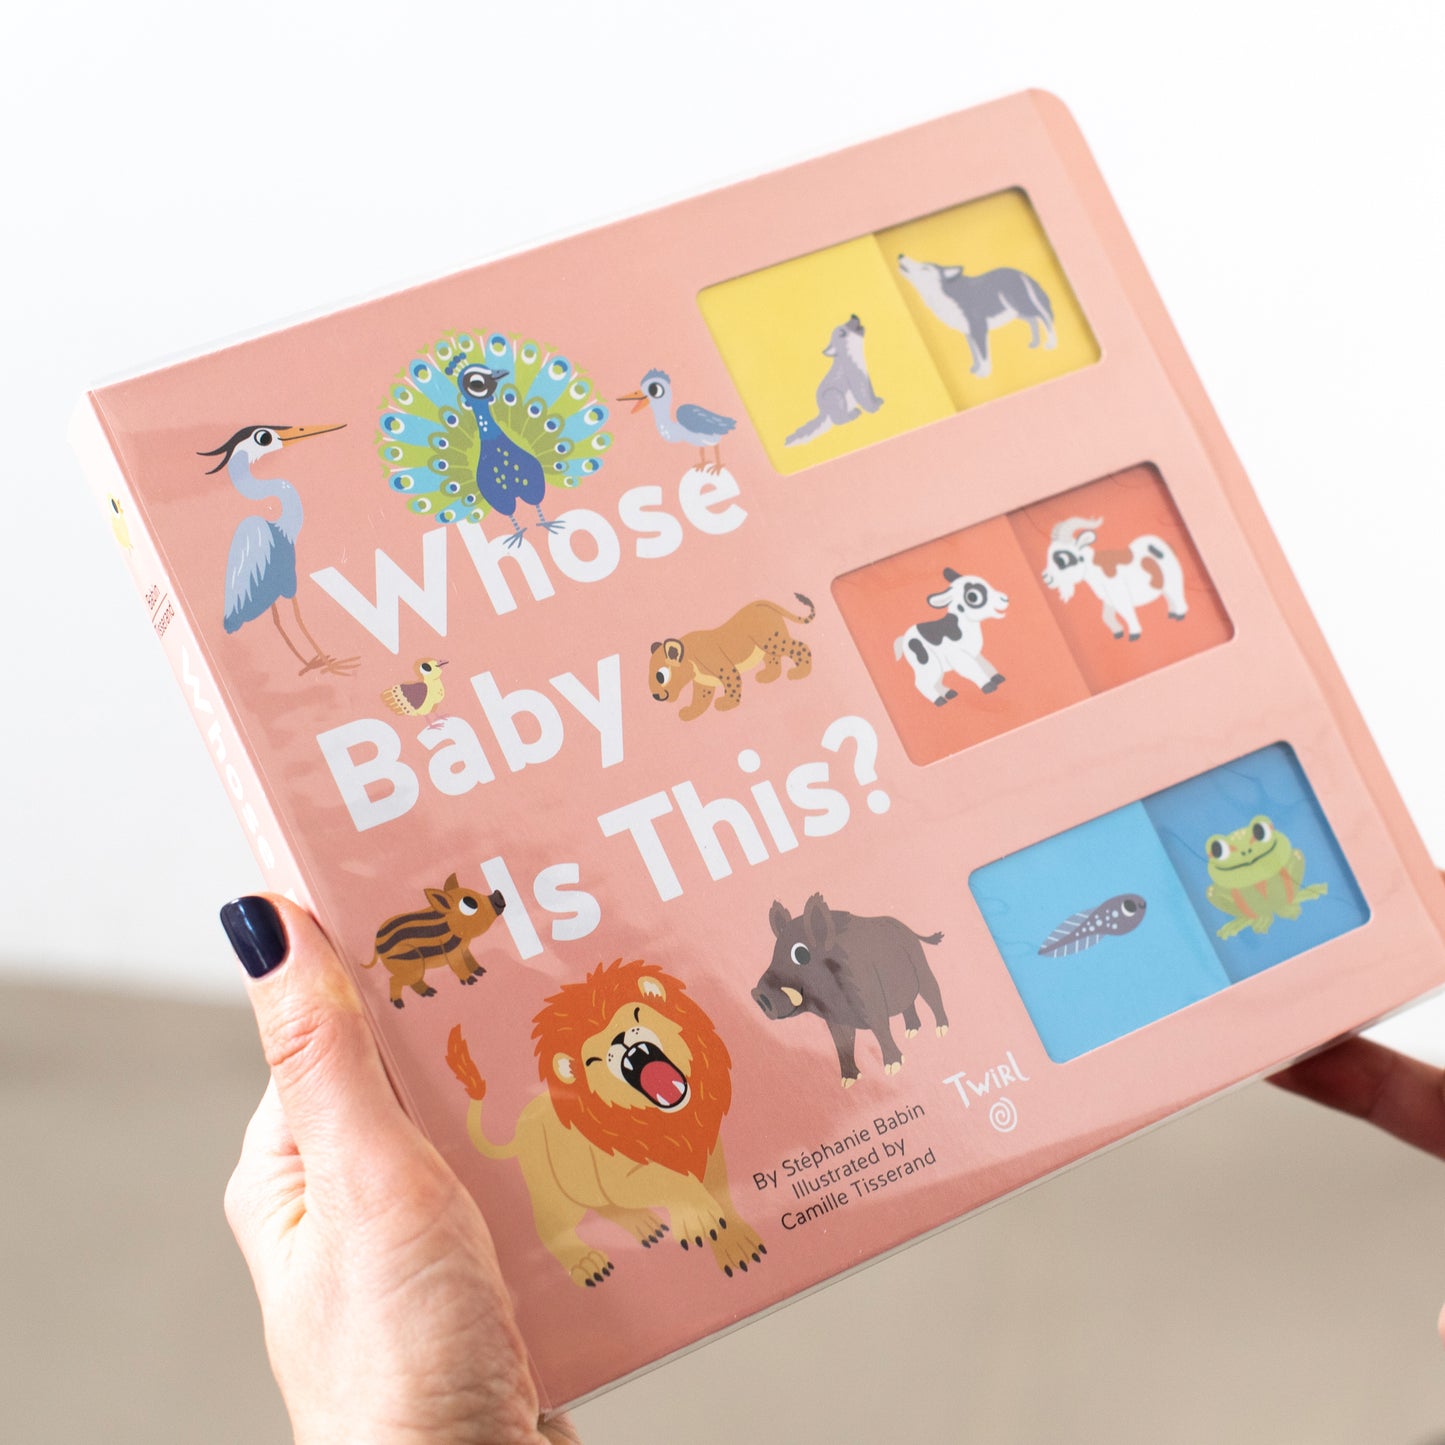 Whose Baby Is This? - Stephanie Babin, Camille Tisserand